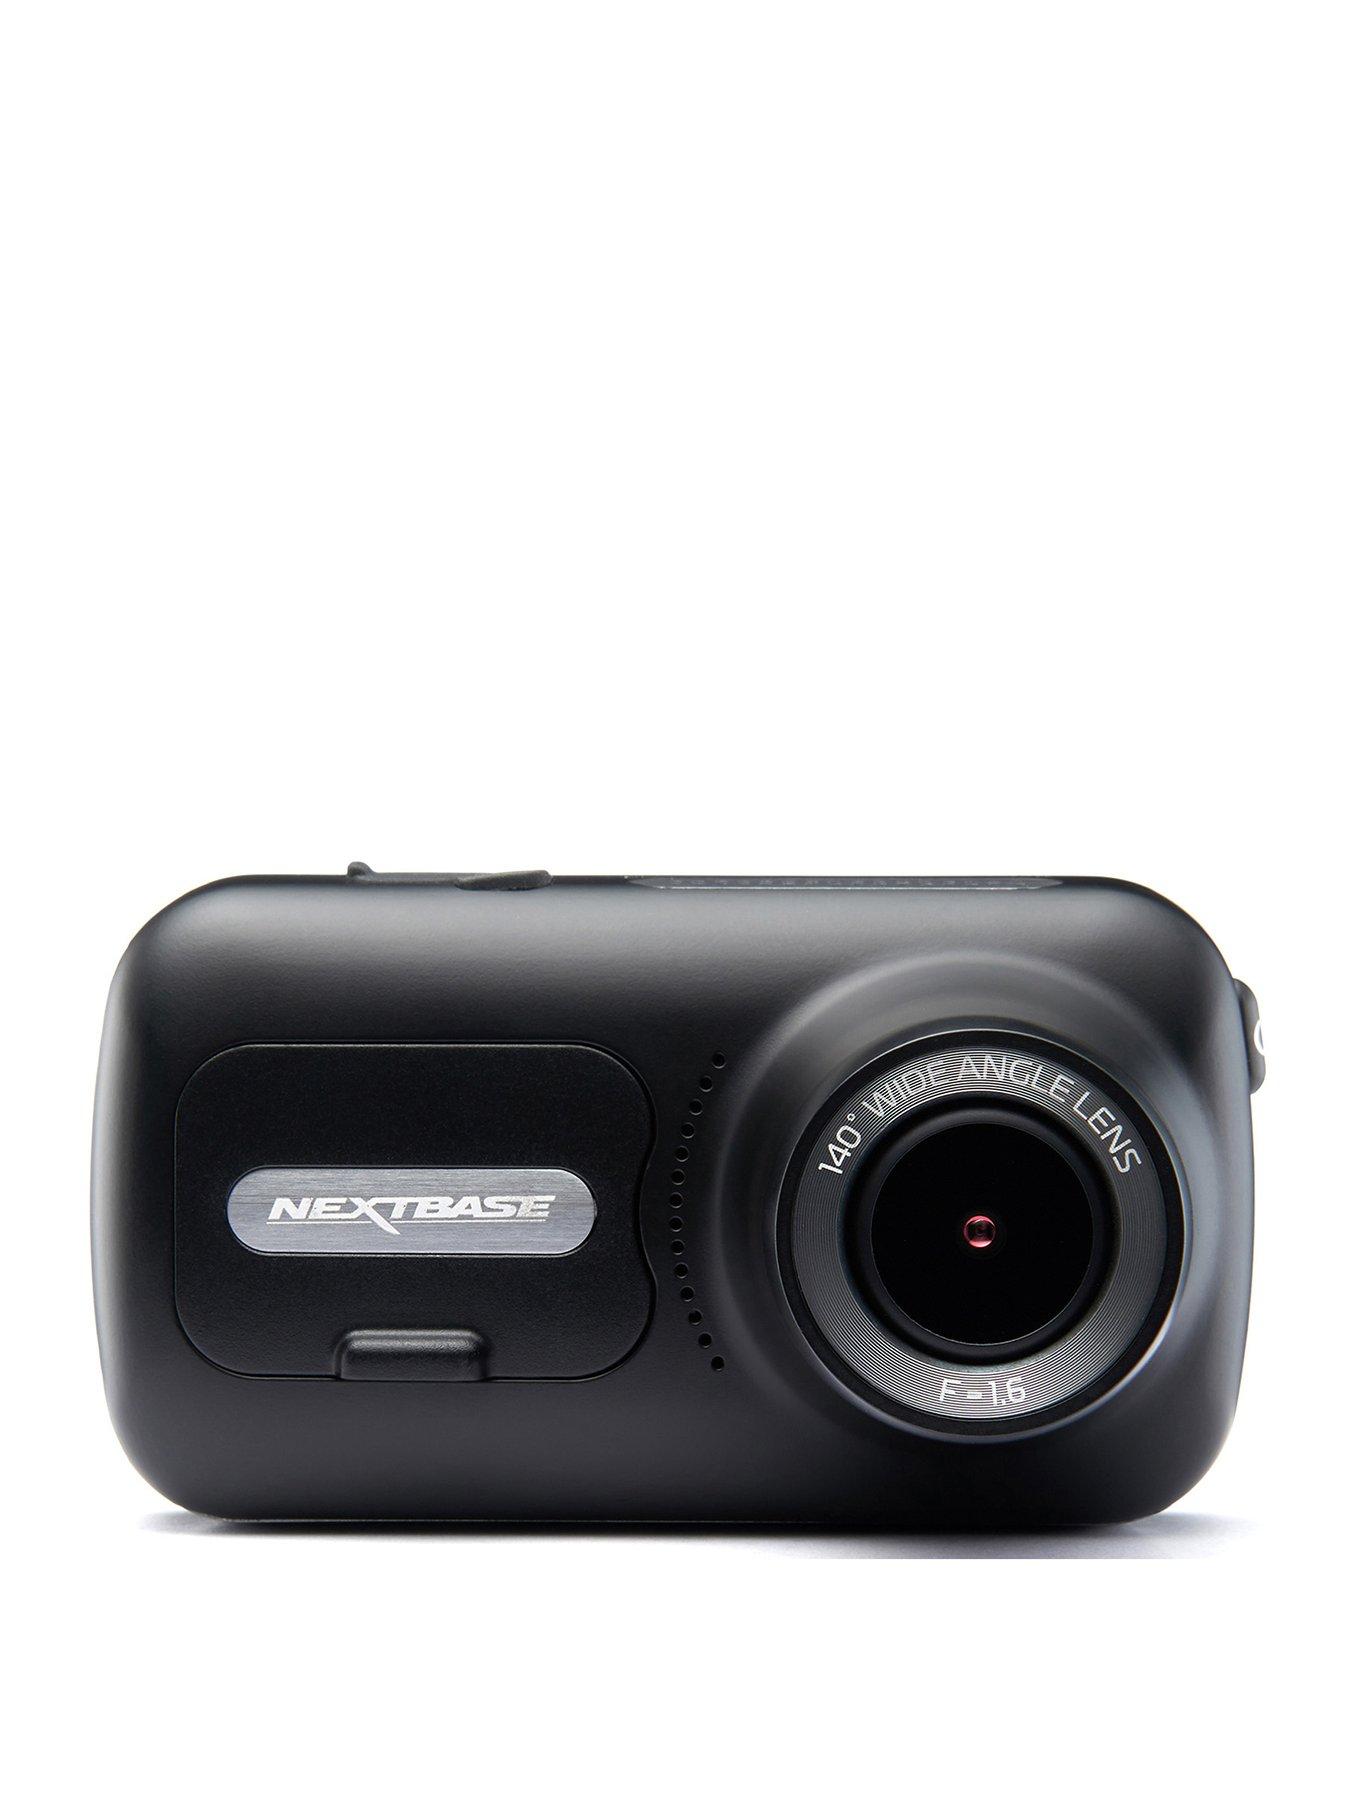 Shop the Best Dash Cams for Safe Driving